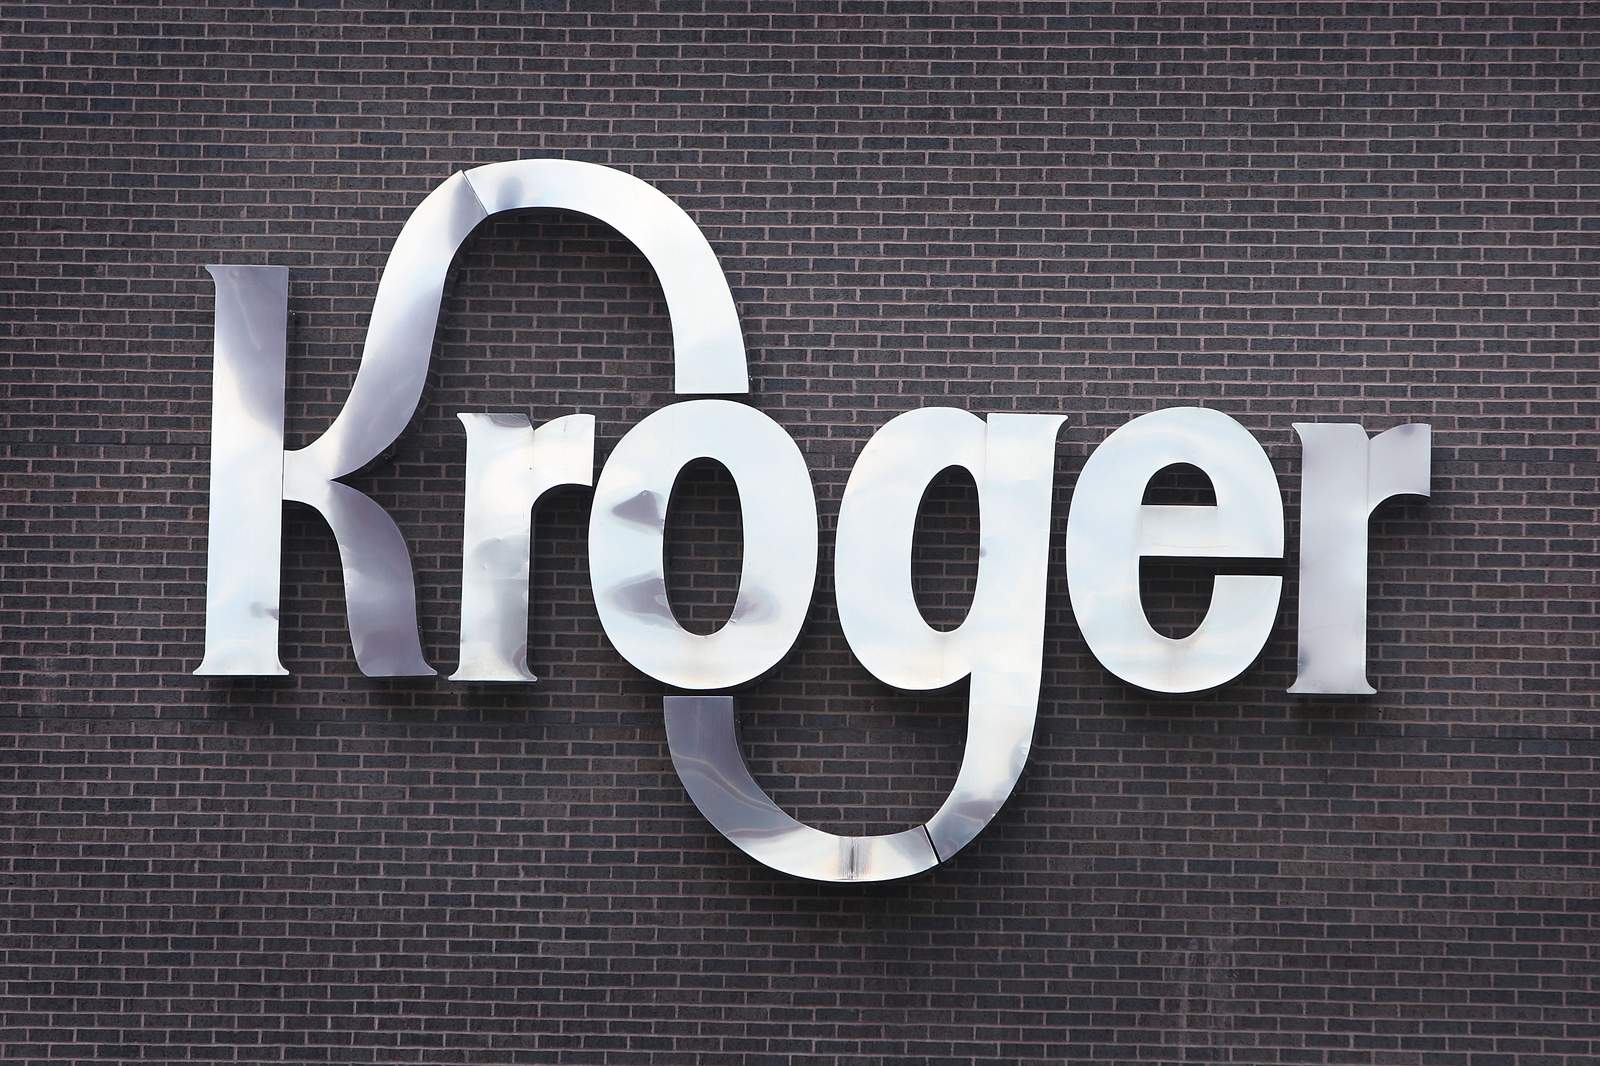 Kroger to dedicate special hours for senior and at-risk customers